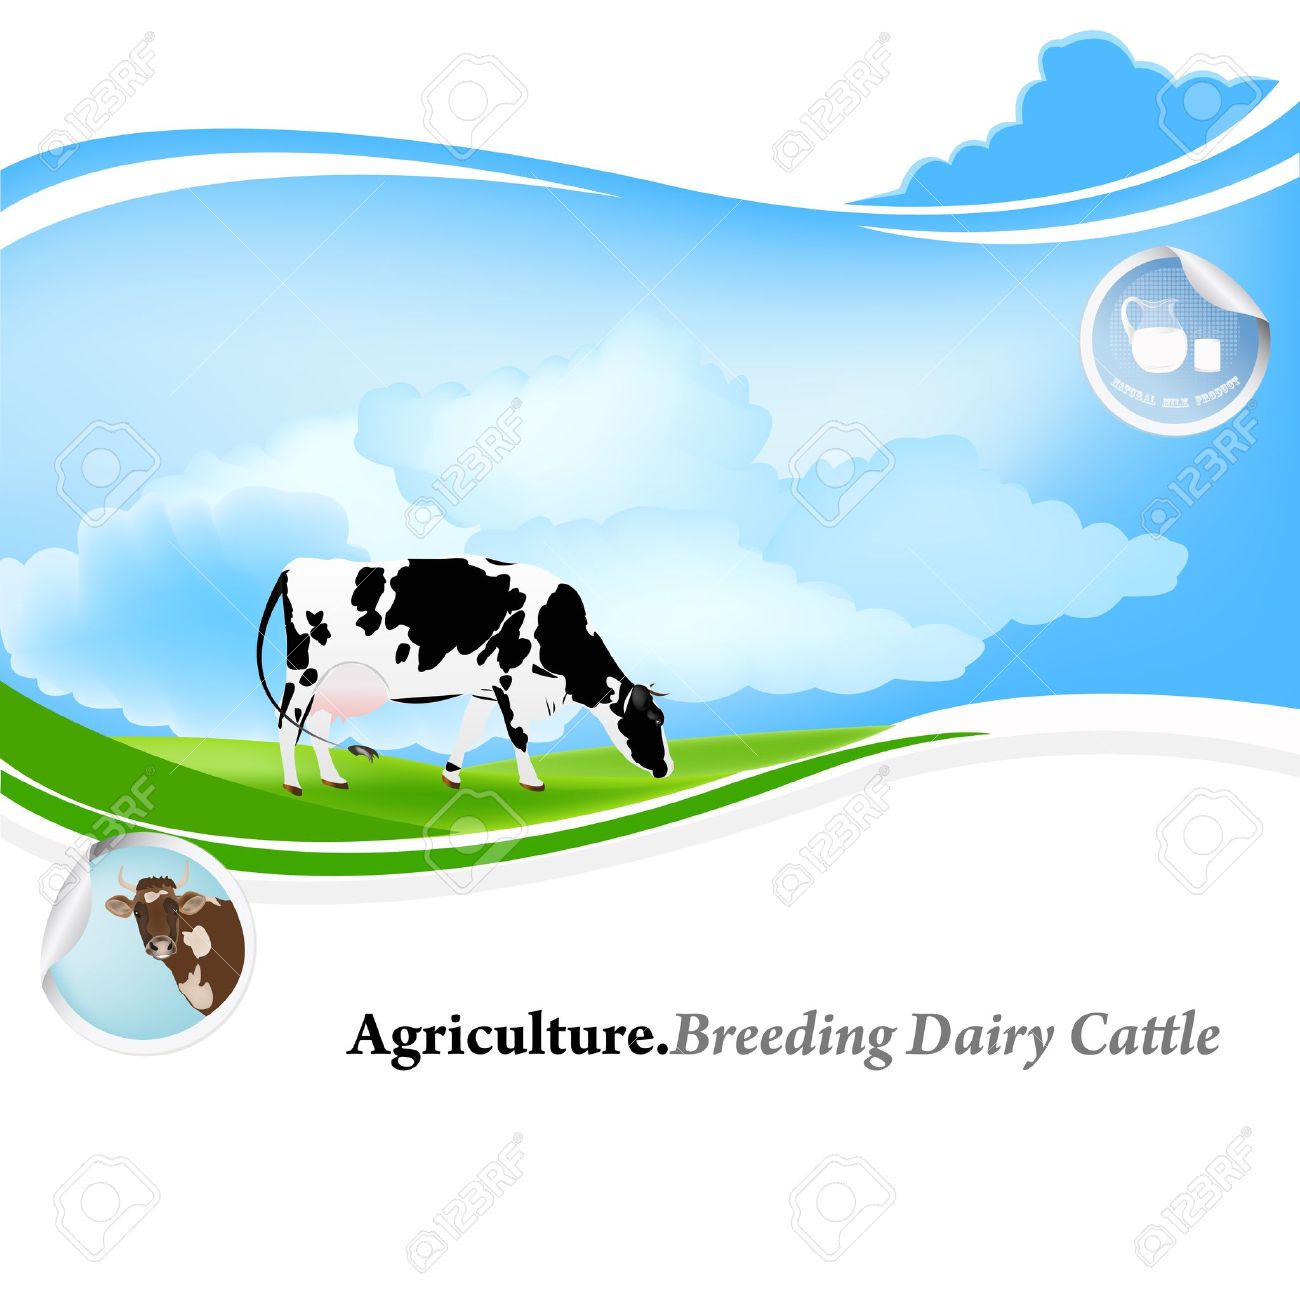 Agriculture Breeding Dairy Cattle Background Royalty Cliparts